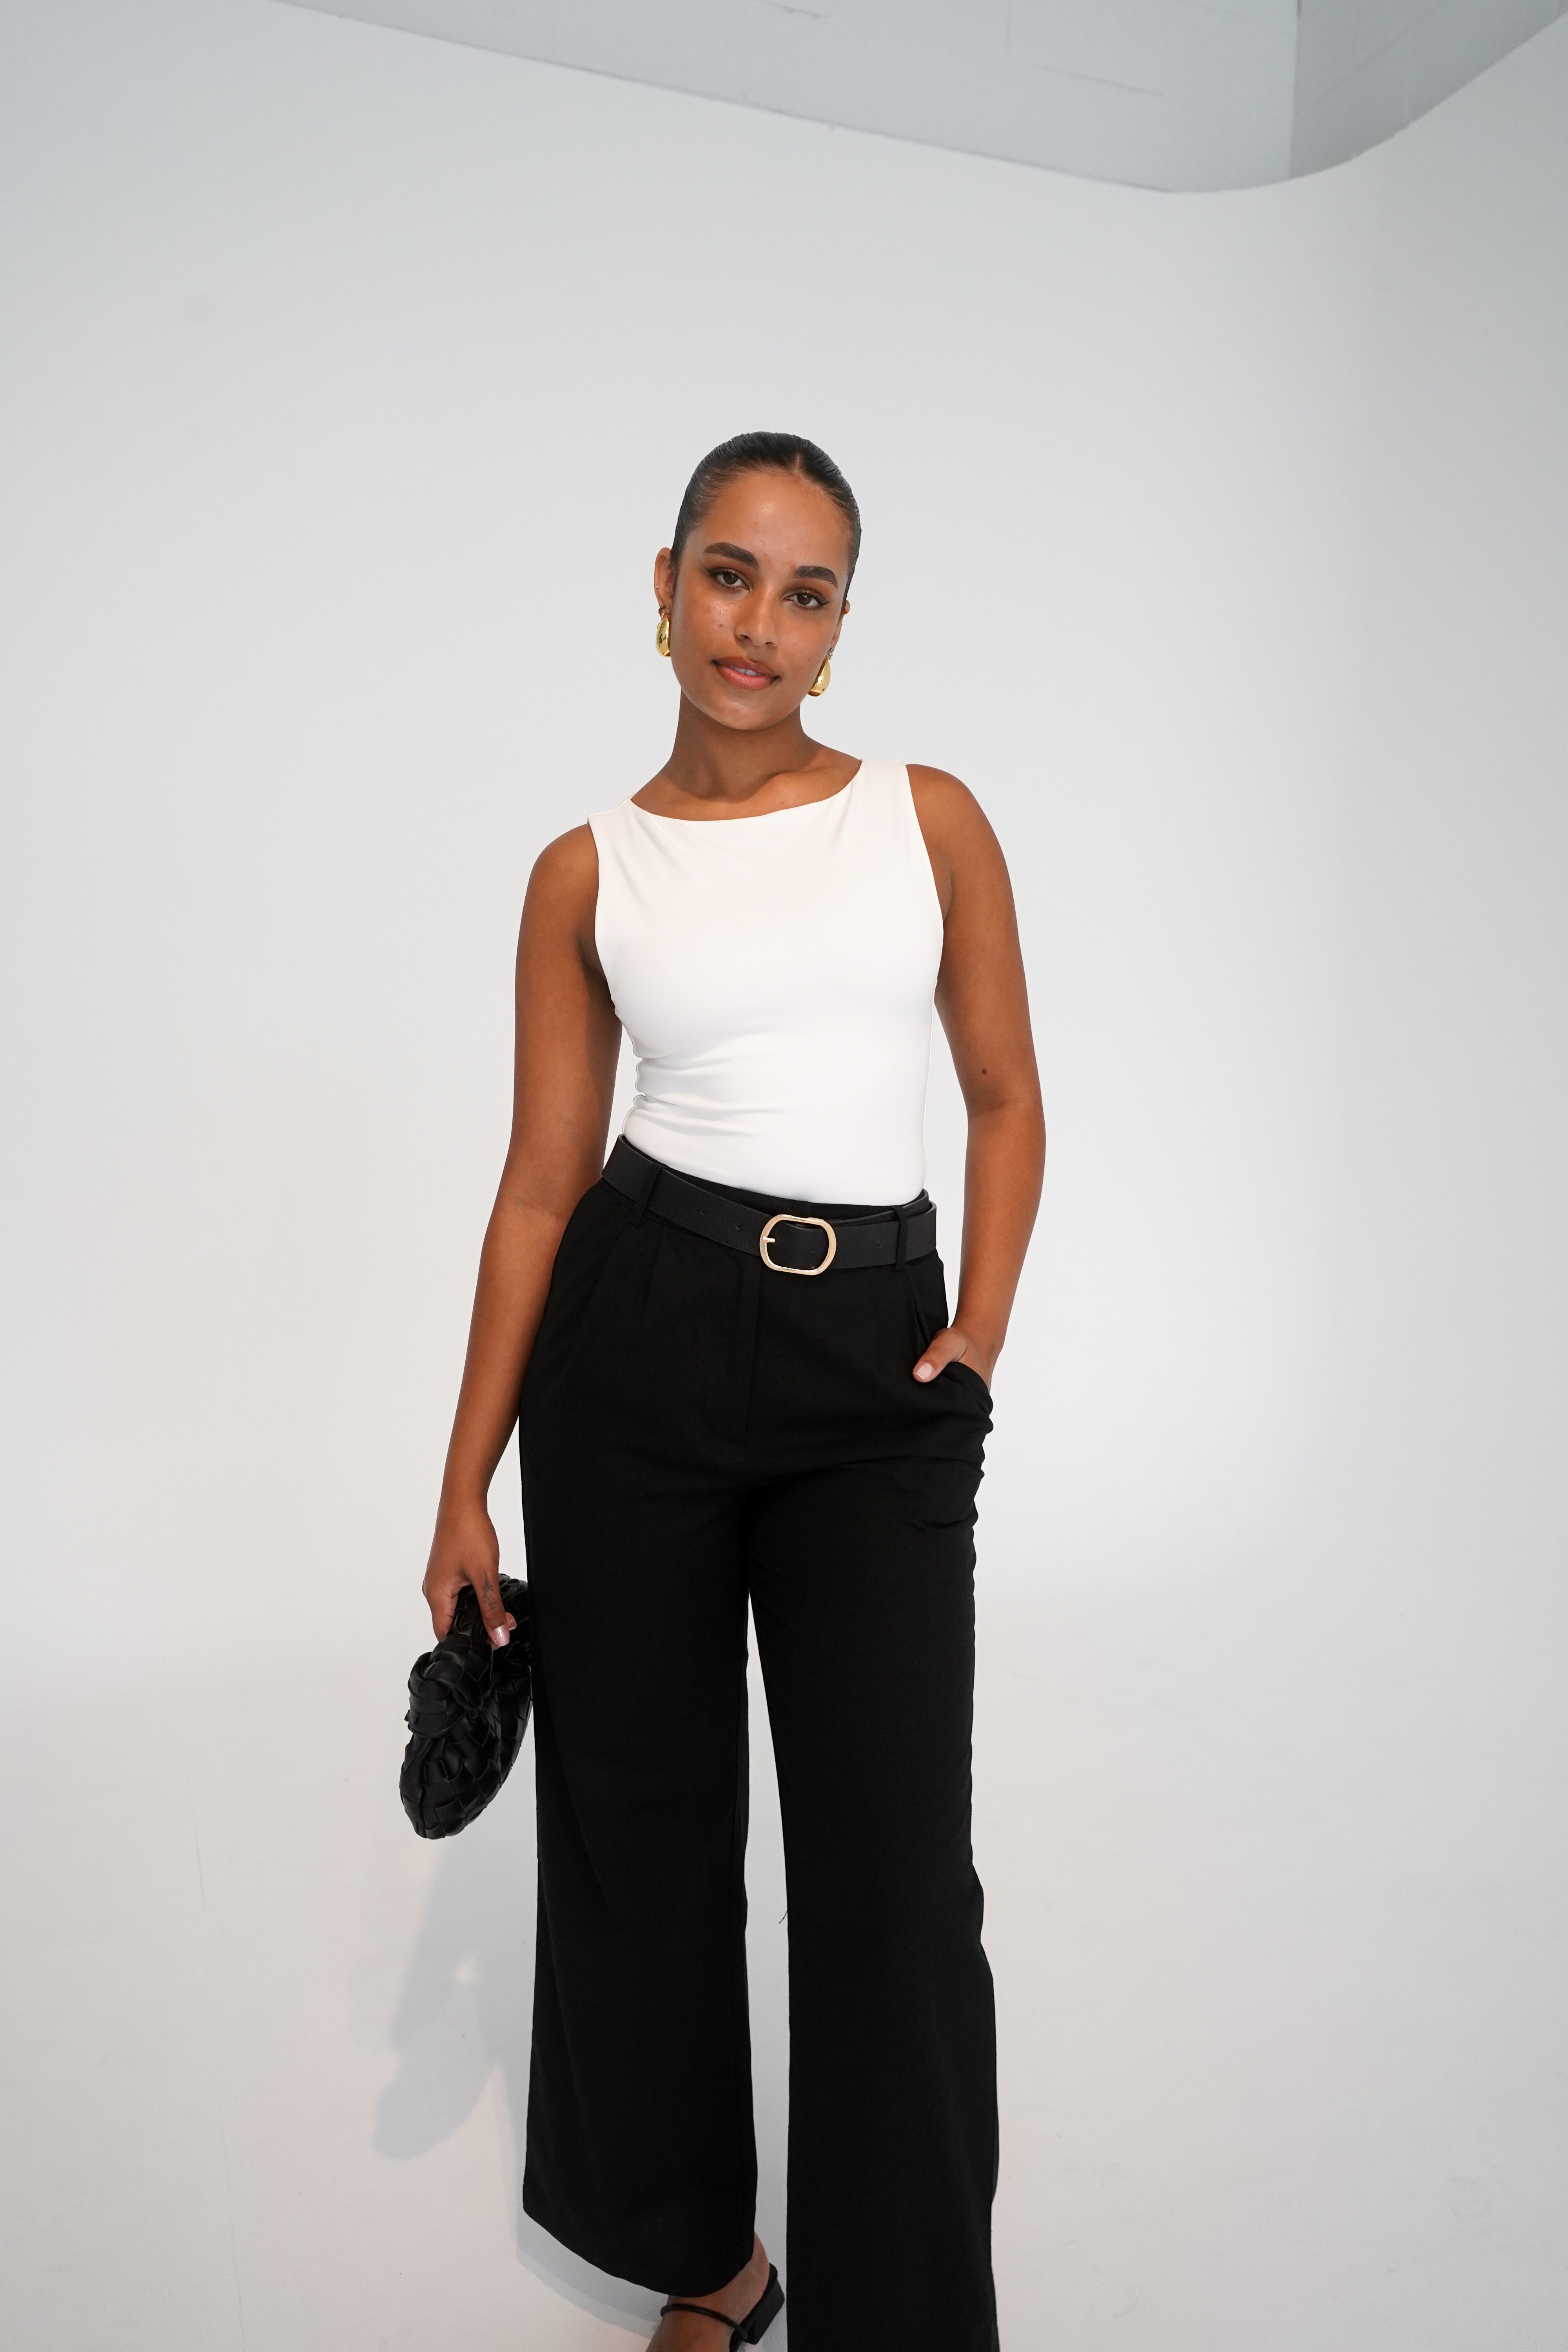 Get these Black Linen Pants by Urban Suburban on Refash – REFASH